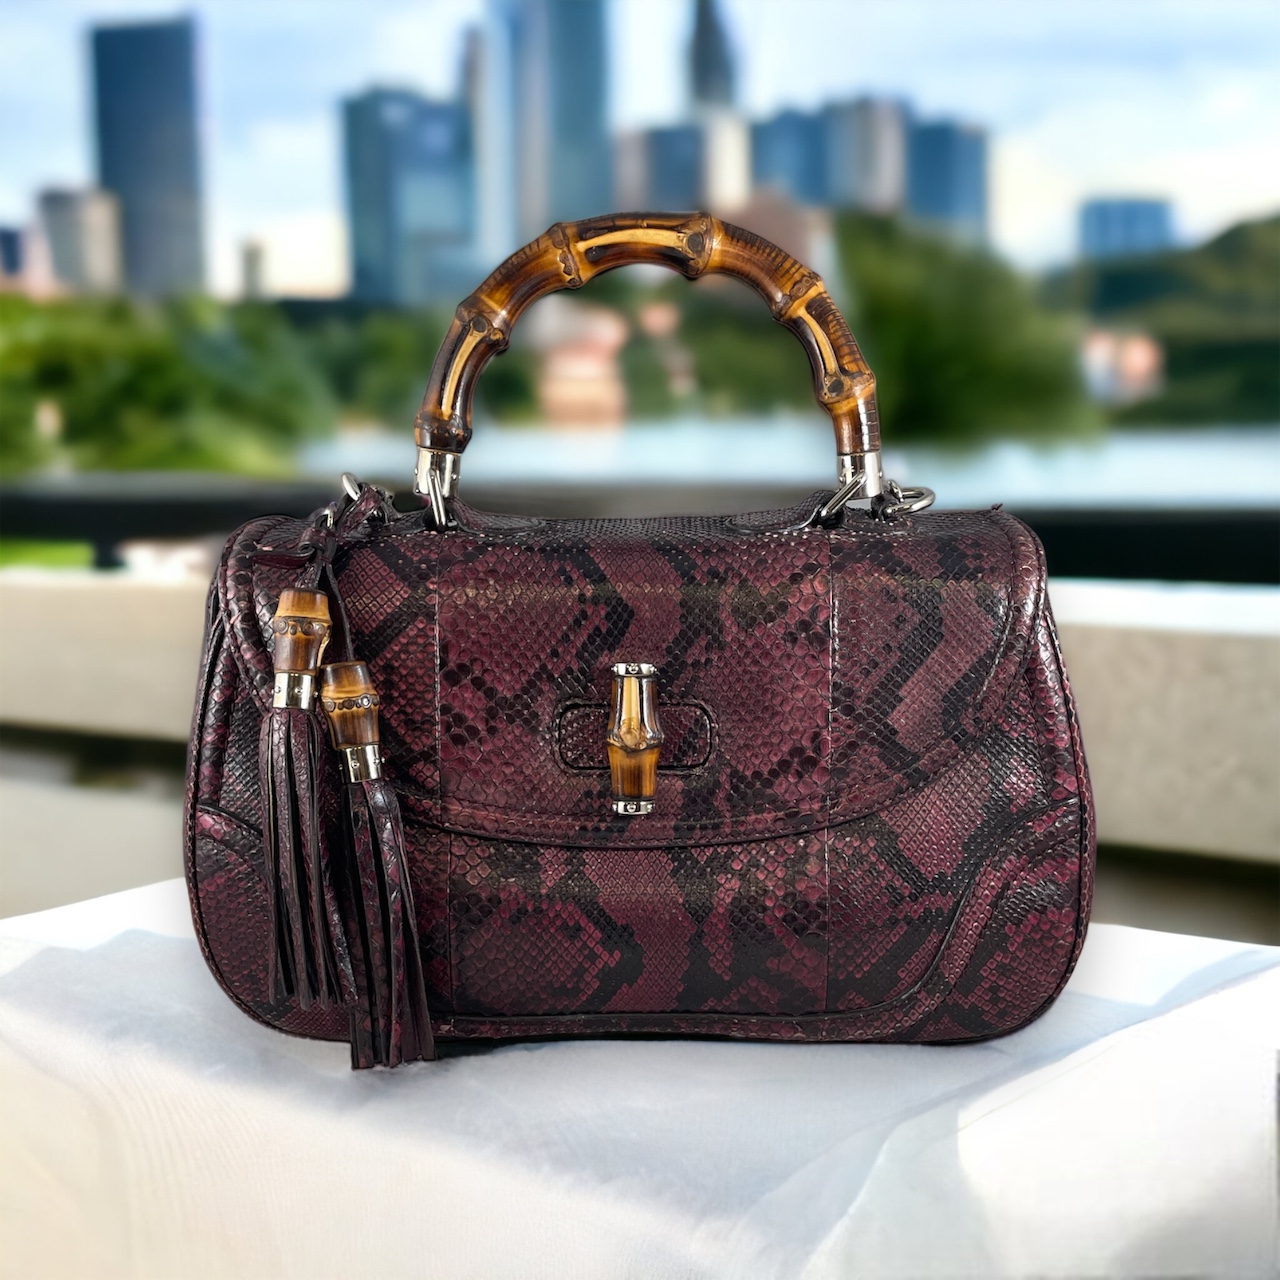 Gucci Bamboo Python Top Handle Bag in Wineberry | MTYCI